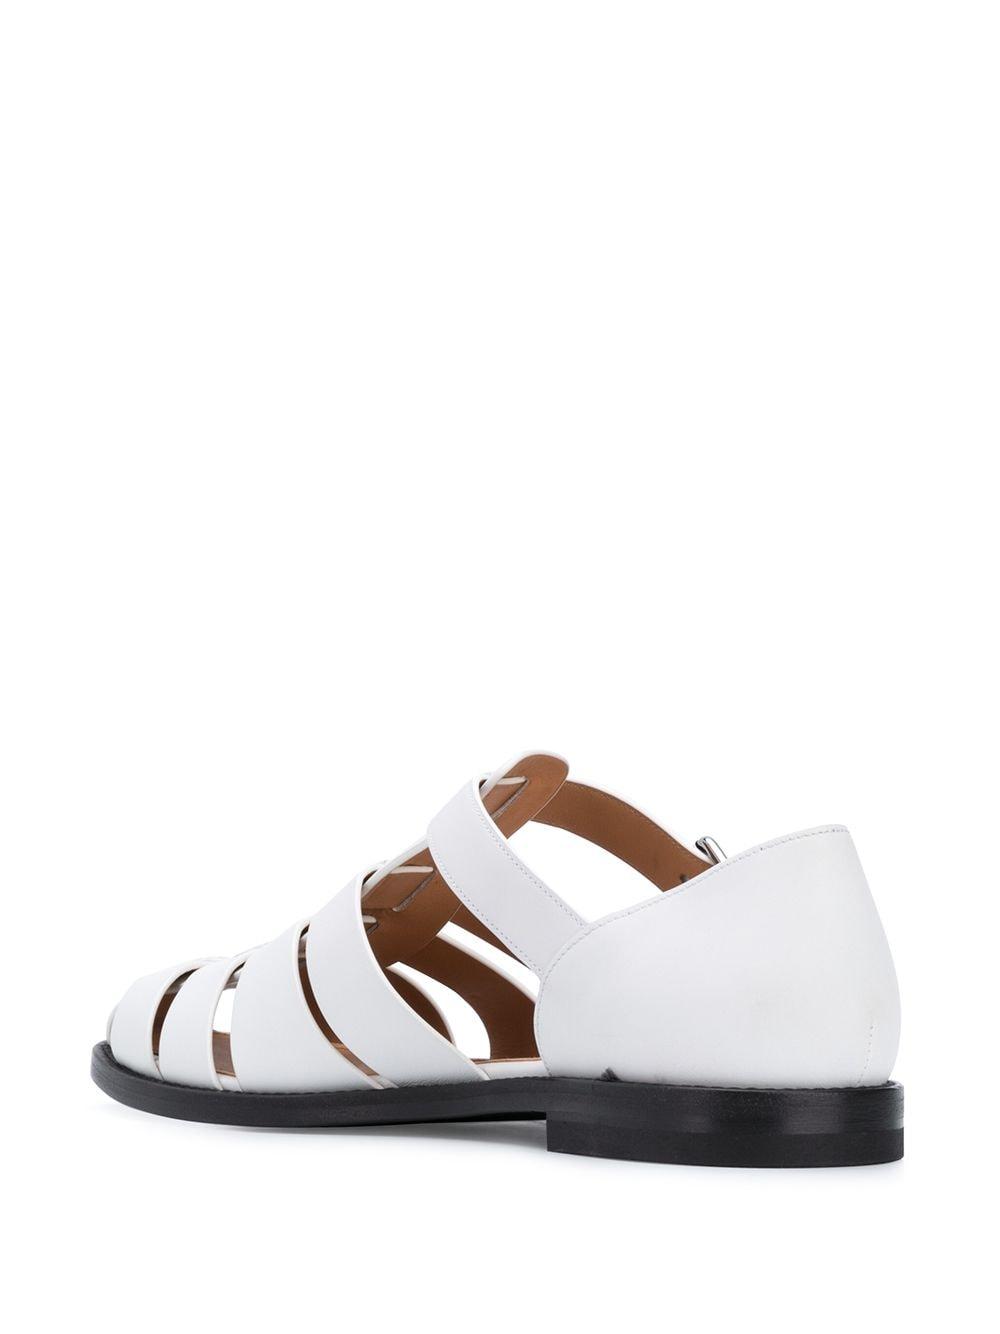 Church's Leather Fisherman Sandals in White for Men - Lyst